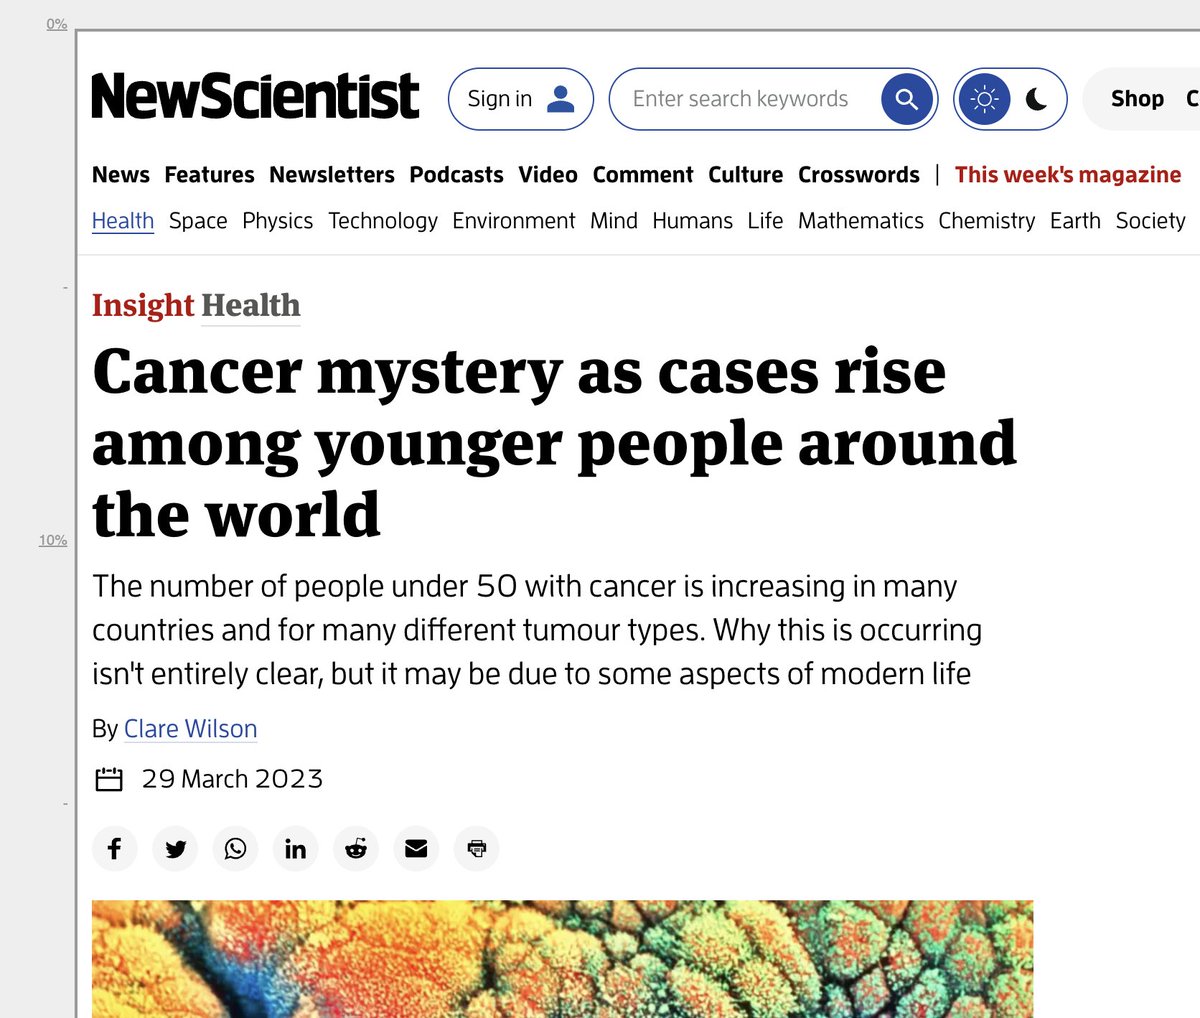 'The number of people under 50 with cancer is increasing in many countries and for many different tumour types. Why this is occurring isn't entirely clear, but it may be due to some aspects of modern life' archive.is/Ne4zn